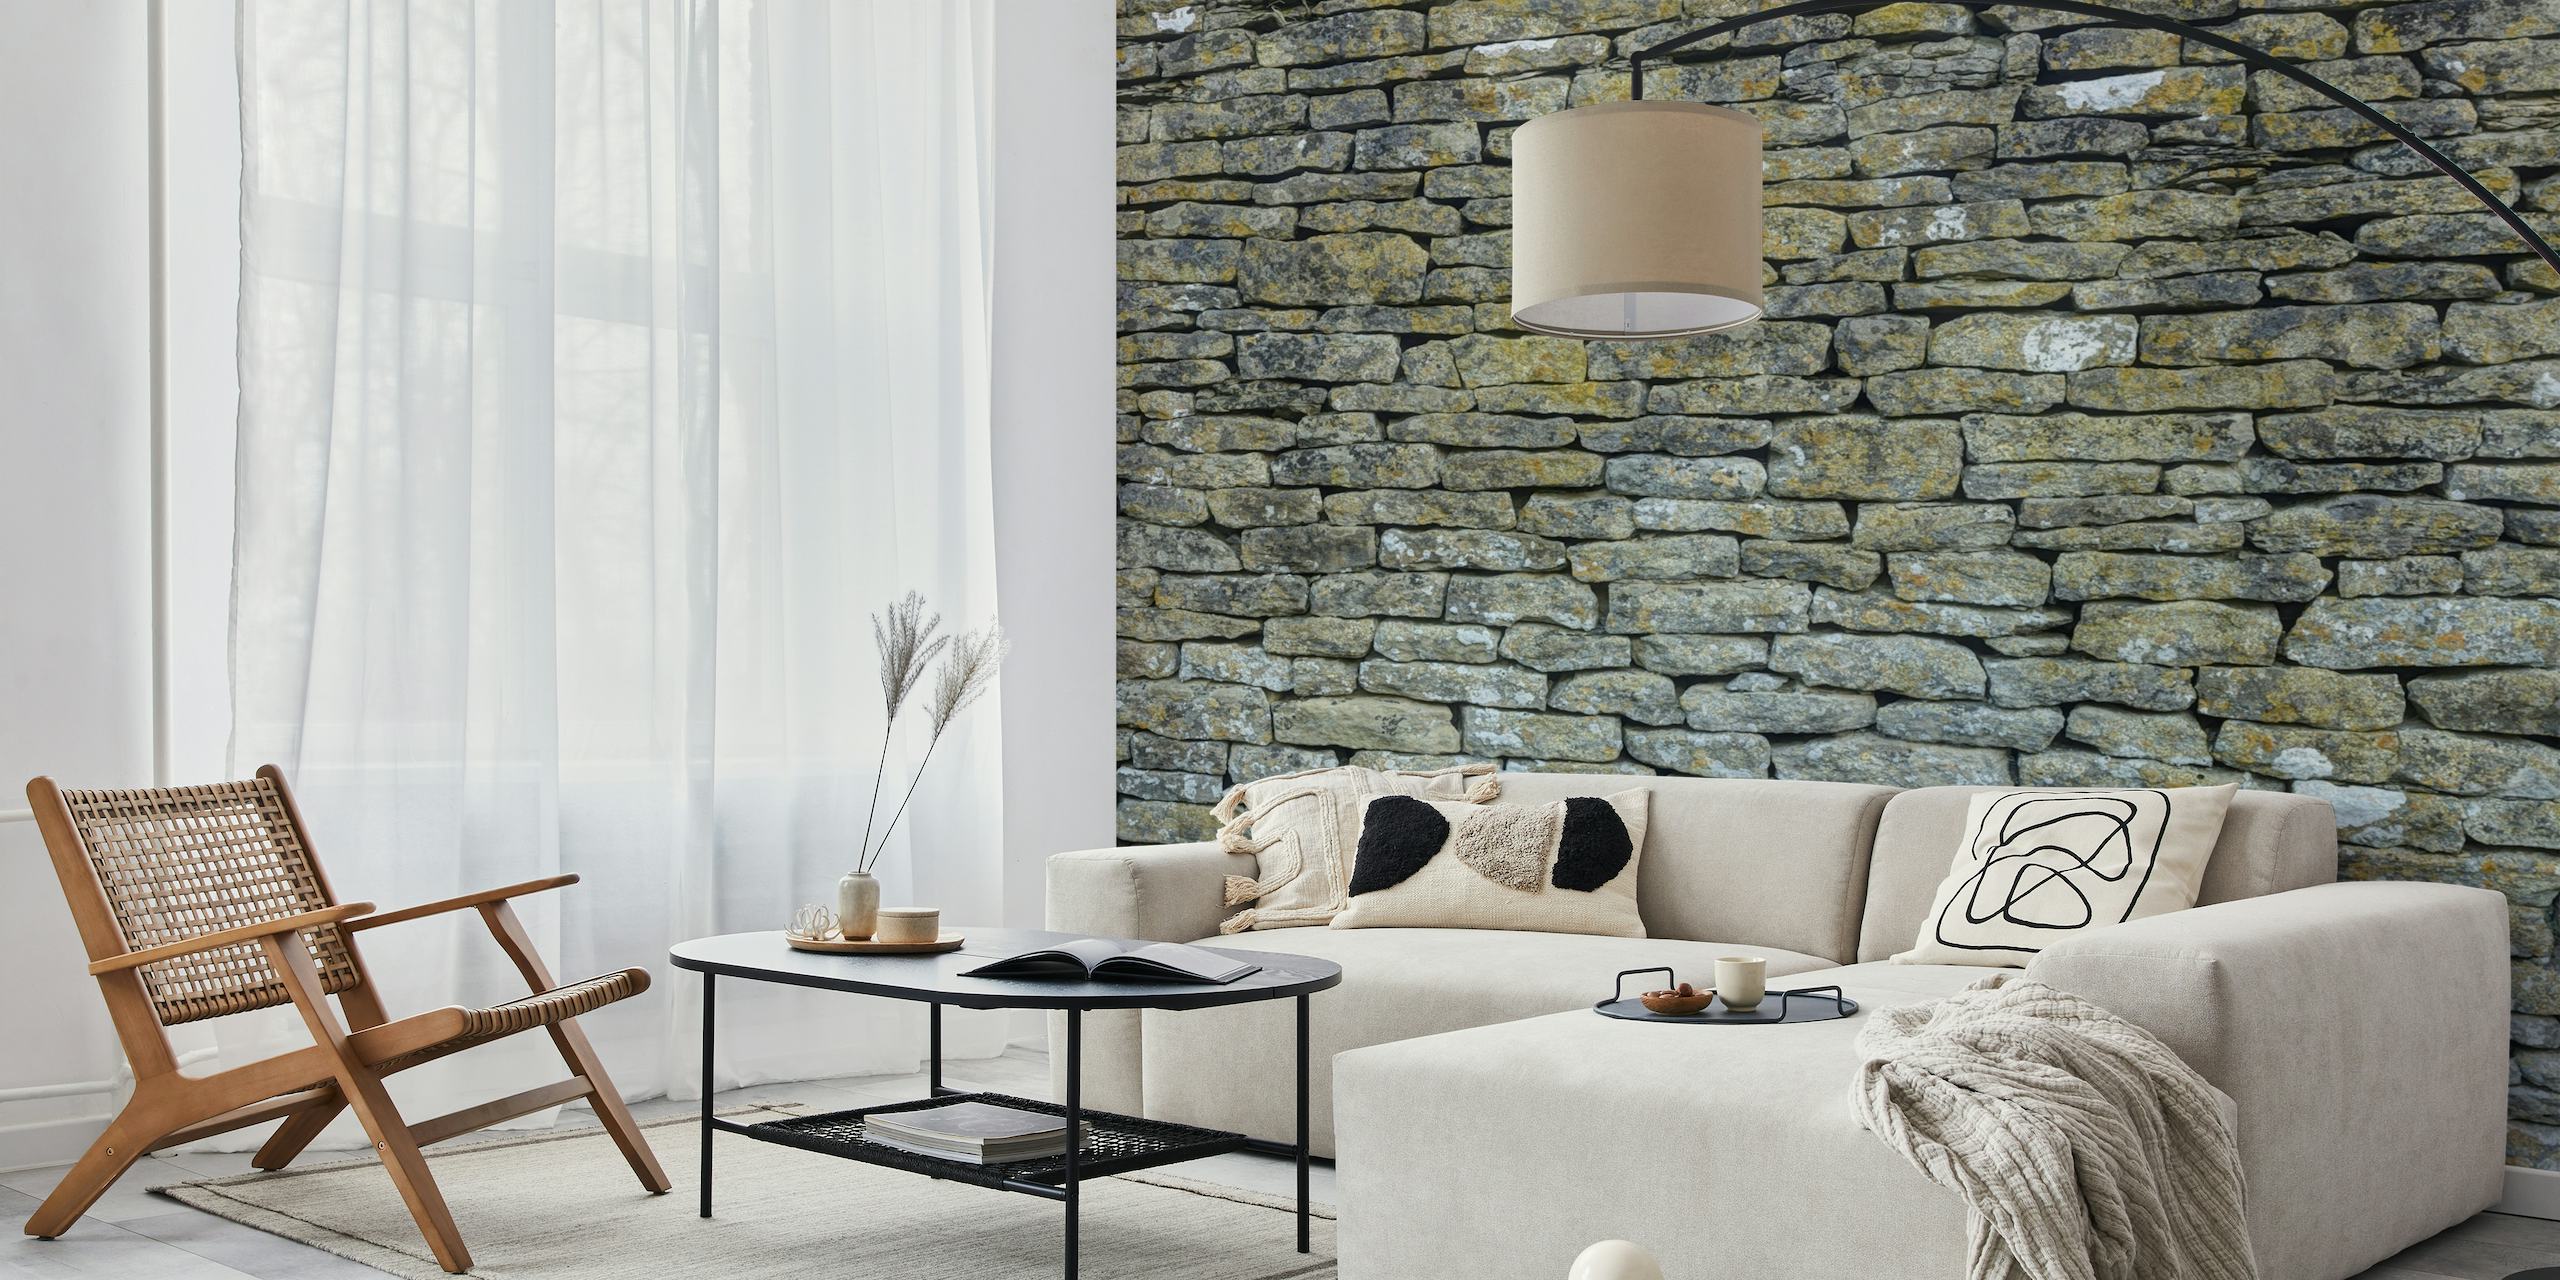 Old rustic stone wall 4 wallpaper